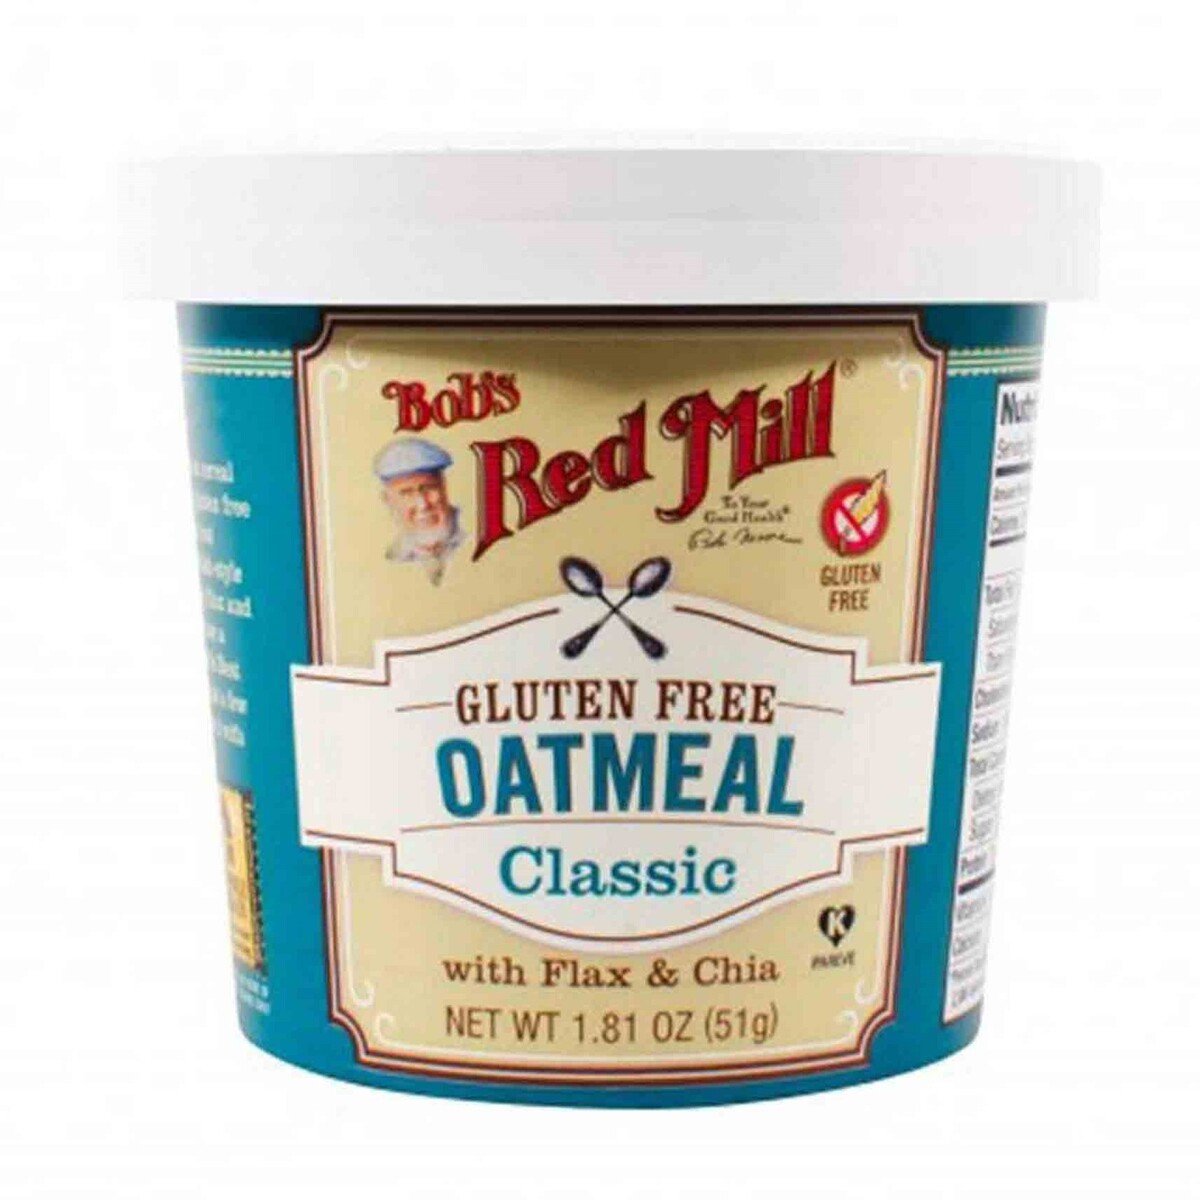 Bob's Red Mill Gluten Free Oatmeal Cup, Classic with Flax & Chia 51 g